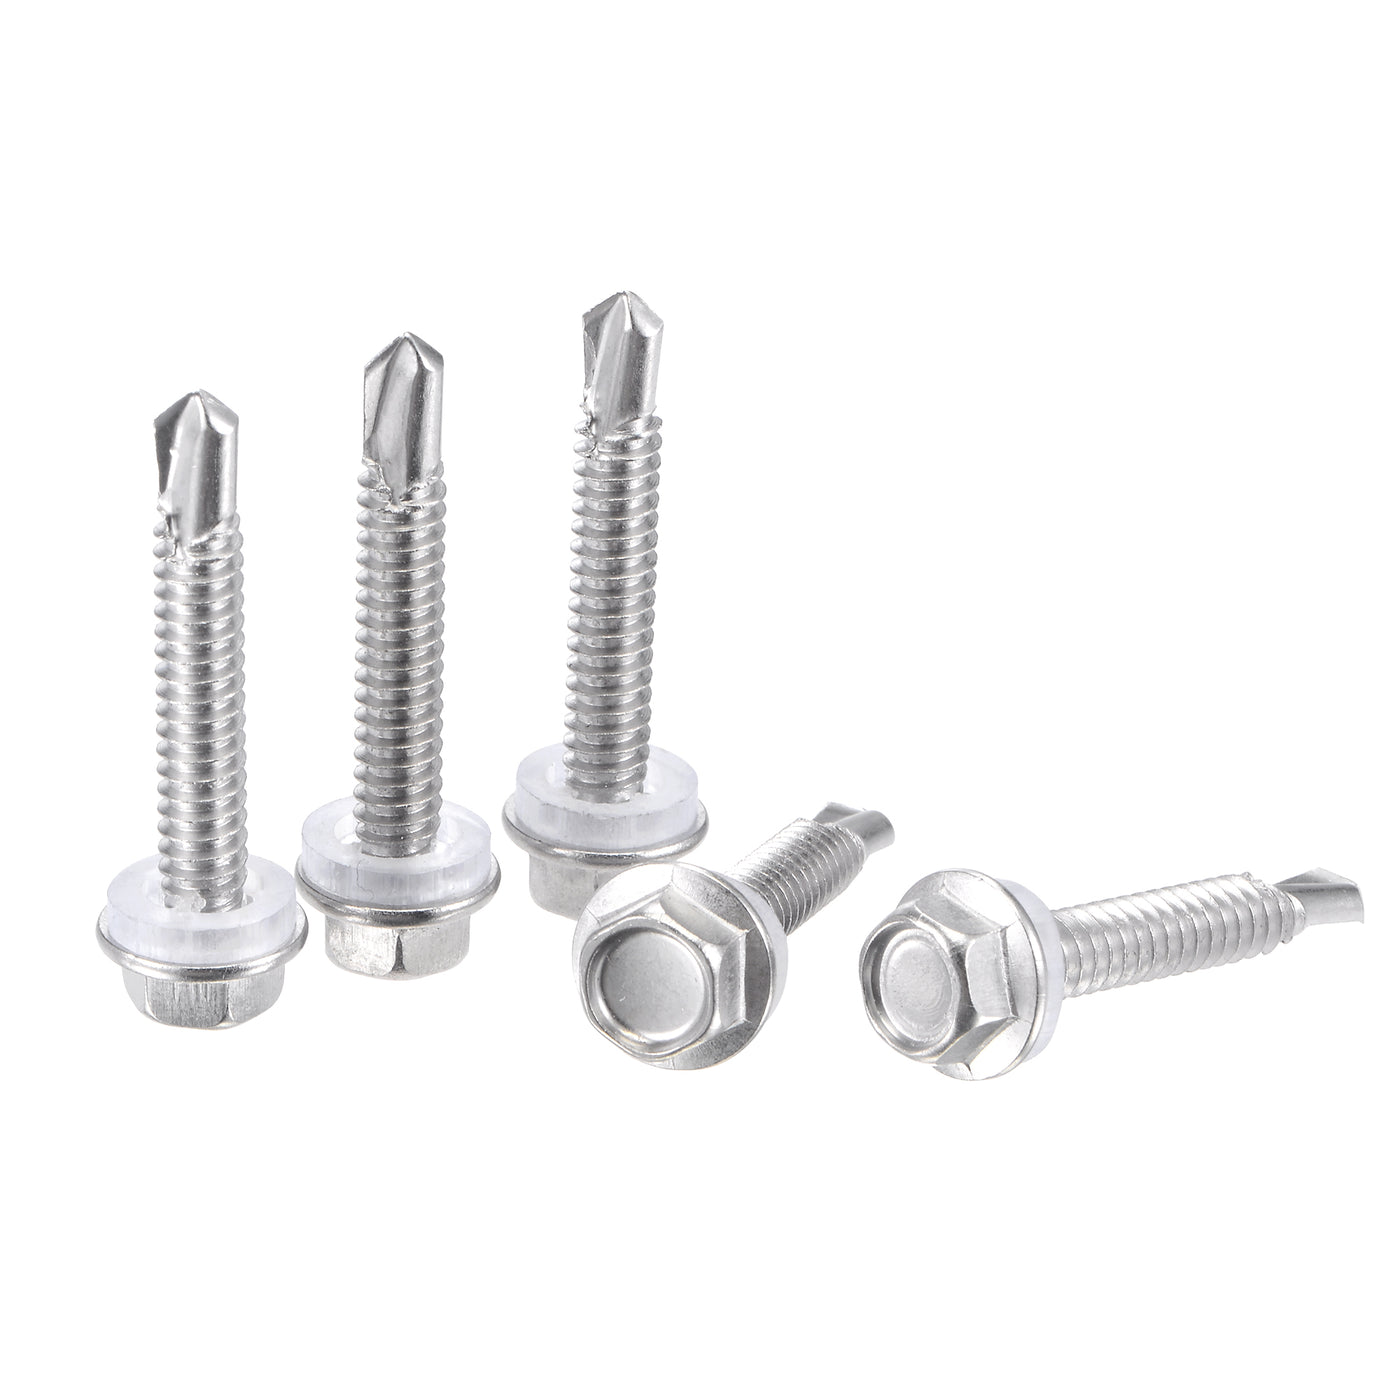 uxcell Uxcell #12 x 1 17/64" 410 Stainless Steel Hex Washer Head Self Drilling Screws 100pcs